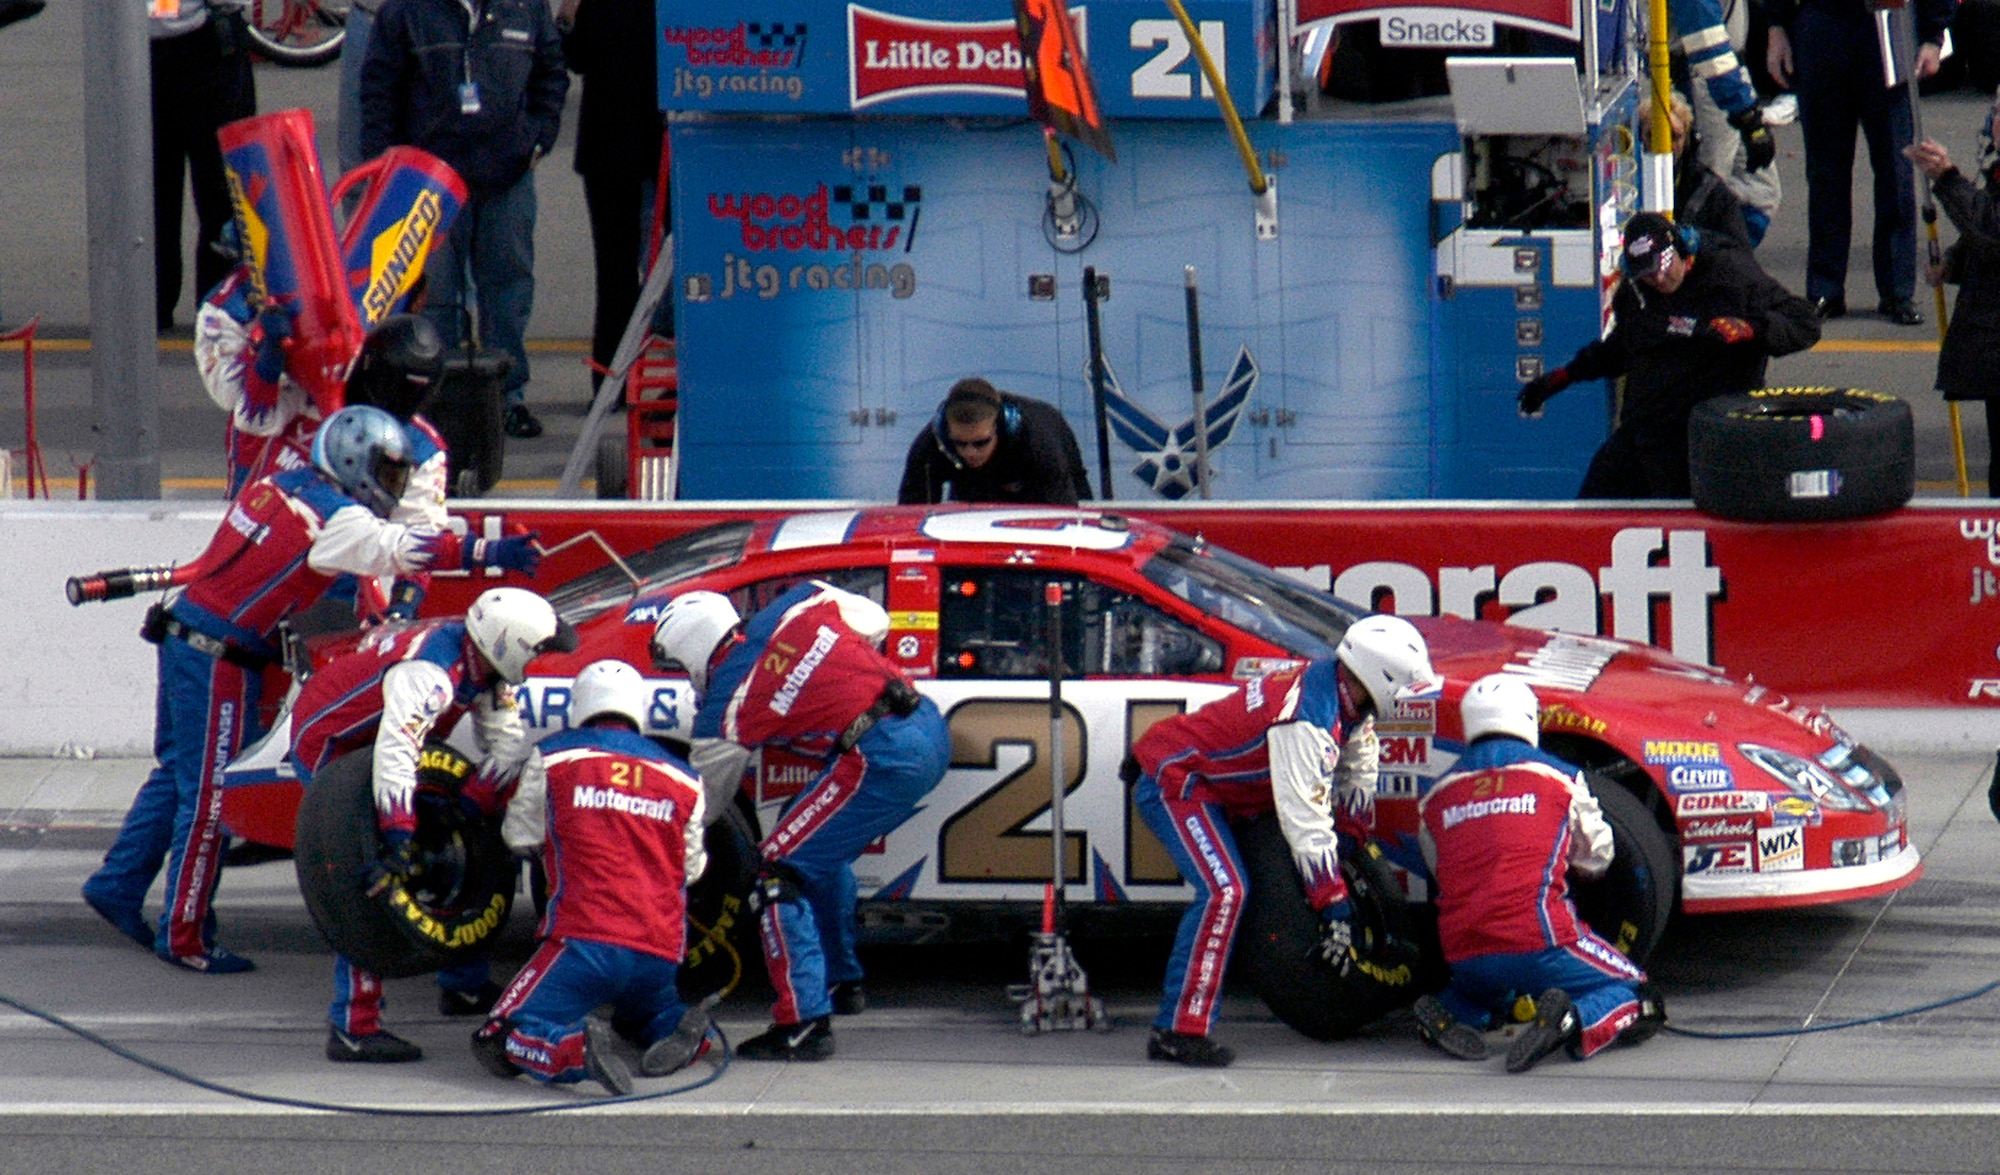 The U.S. Air Force #21 Motorcraft race car driven by Ken Schrader stops for a pit stop to get four new tires and a tank of gas during the UAW Daimler Chrysler 400 race at Las Vegas, Nev., Sunday, March 12, 2006. The car ended the day with engine problems on lap 187, and finished in 41st place. (U.S. Air Force photo/Staff Sgt. Chrissy FitzGerald)                           
                      

                             